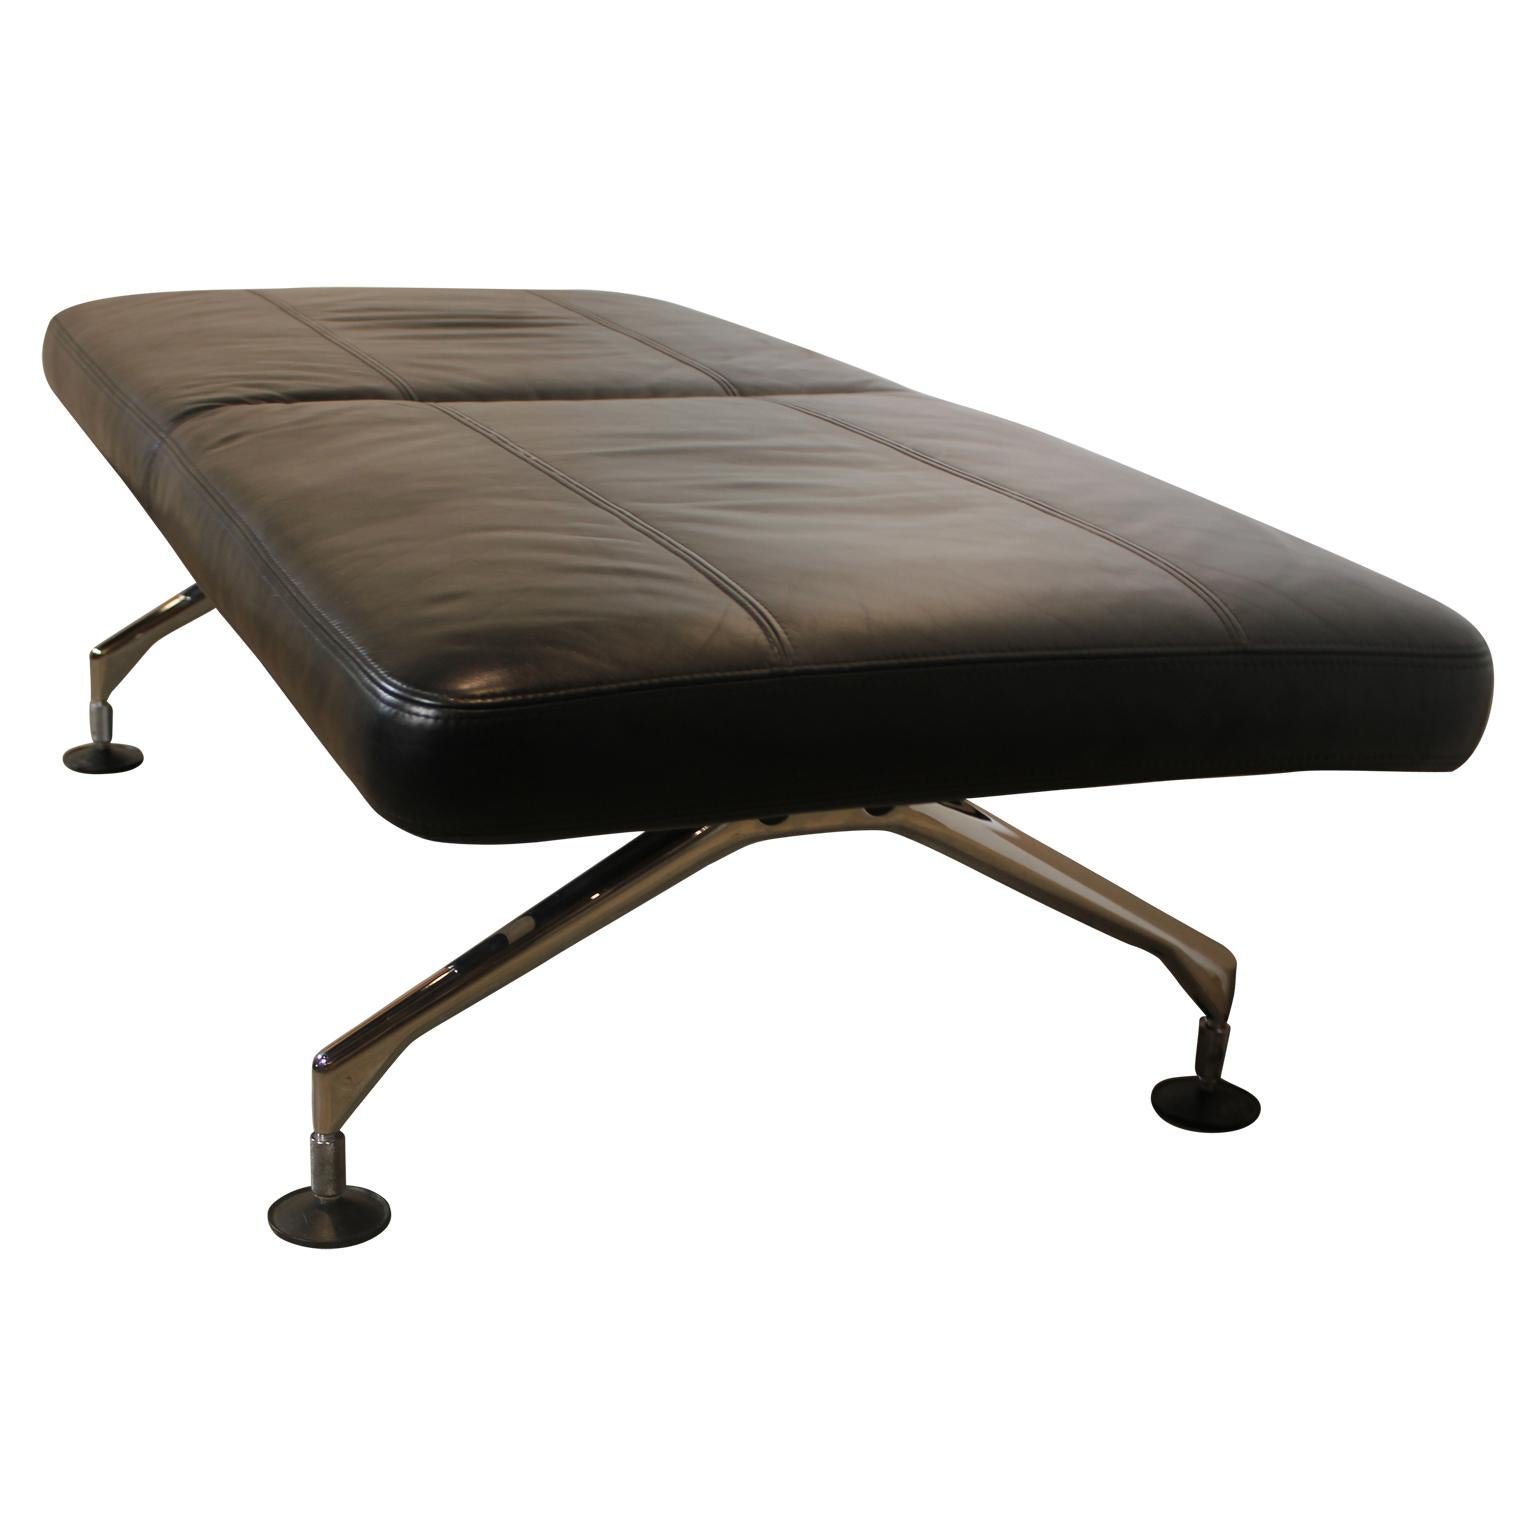 1990s modern style black area bench designed by Antonio Citterio for Vitra. The leather is in great condition. It has chrome legs with padded feet. One bench is available.